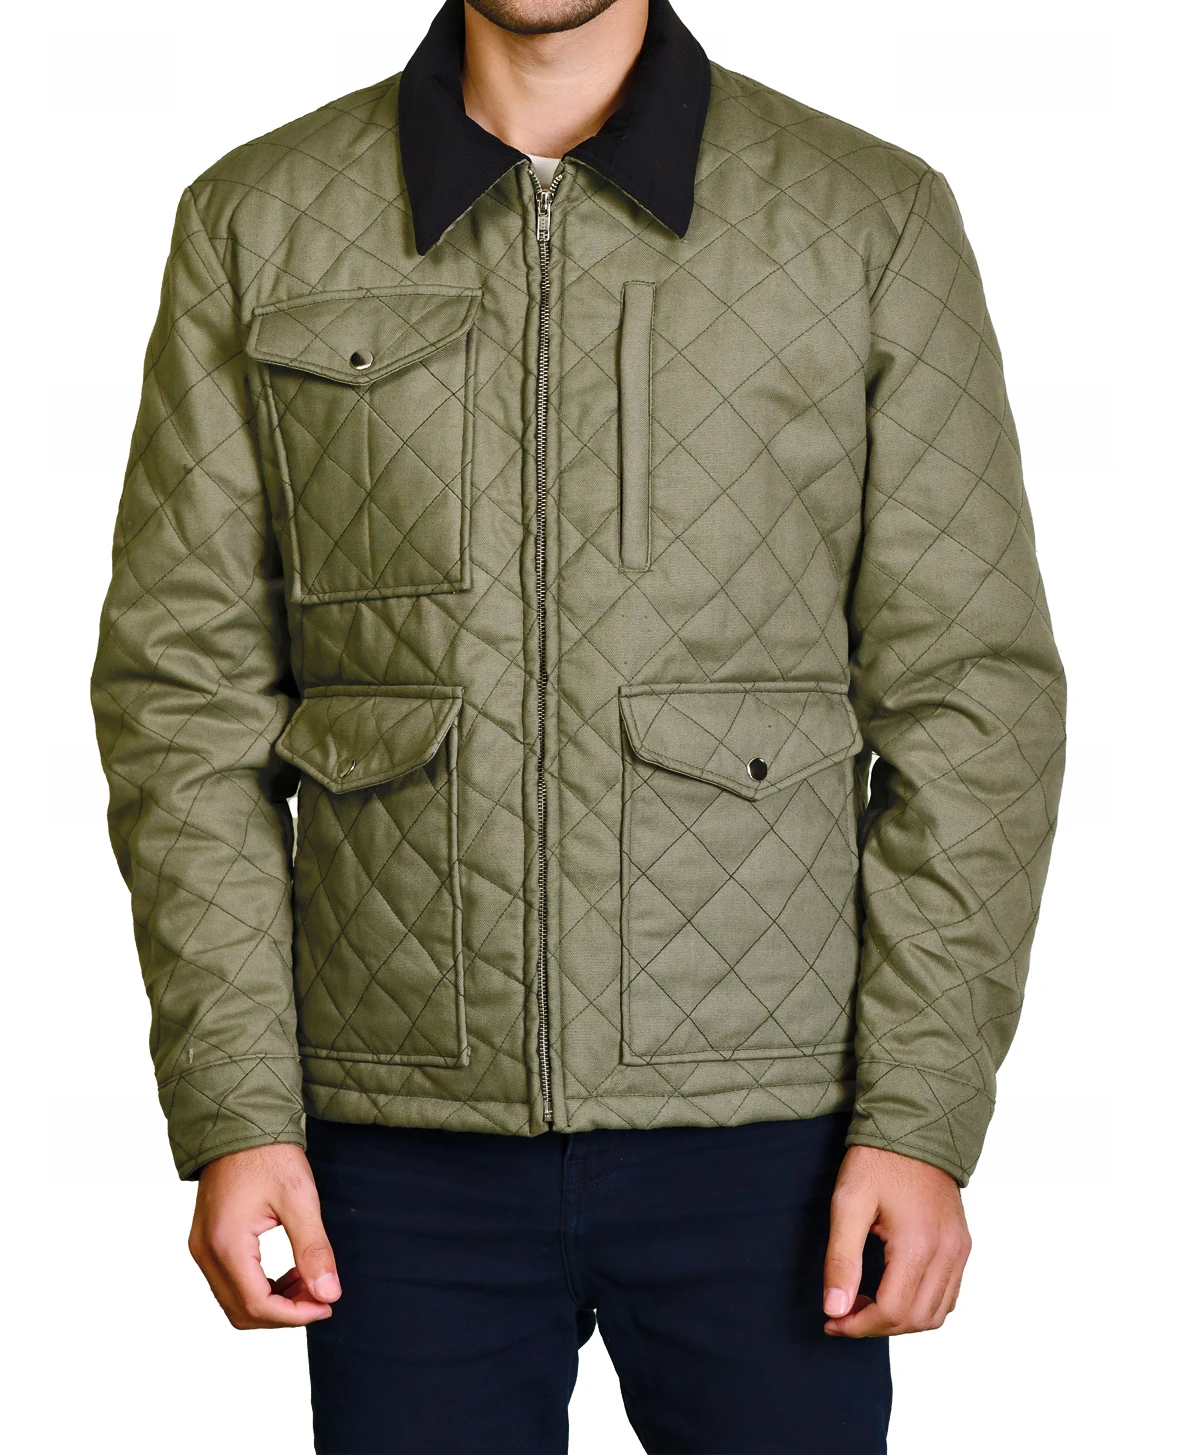 Dutton-Green British Jackets Yellowstone S04 John Dutton Green Quilted Jacket | Kevin Costner Yellowstone Green Quilted Cotton Jacket